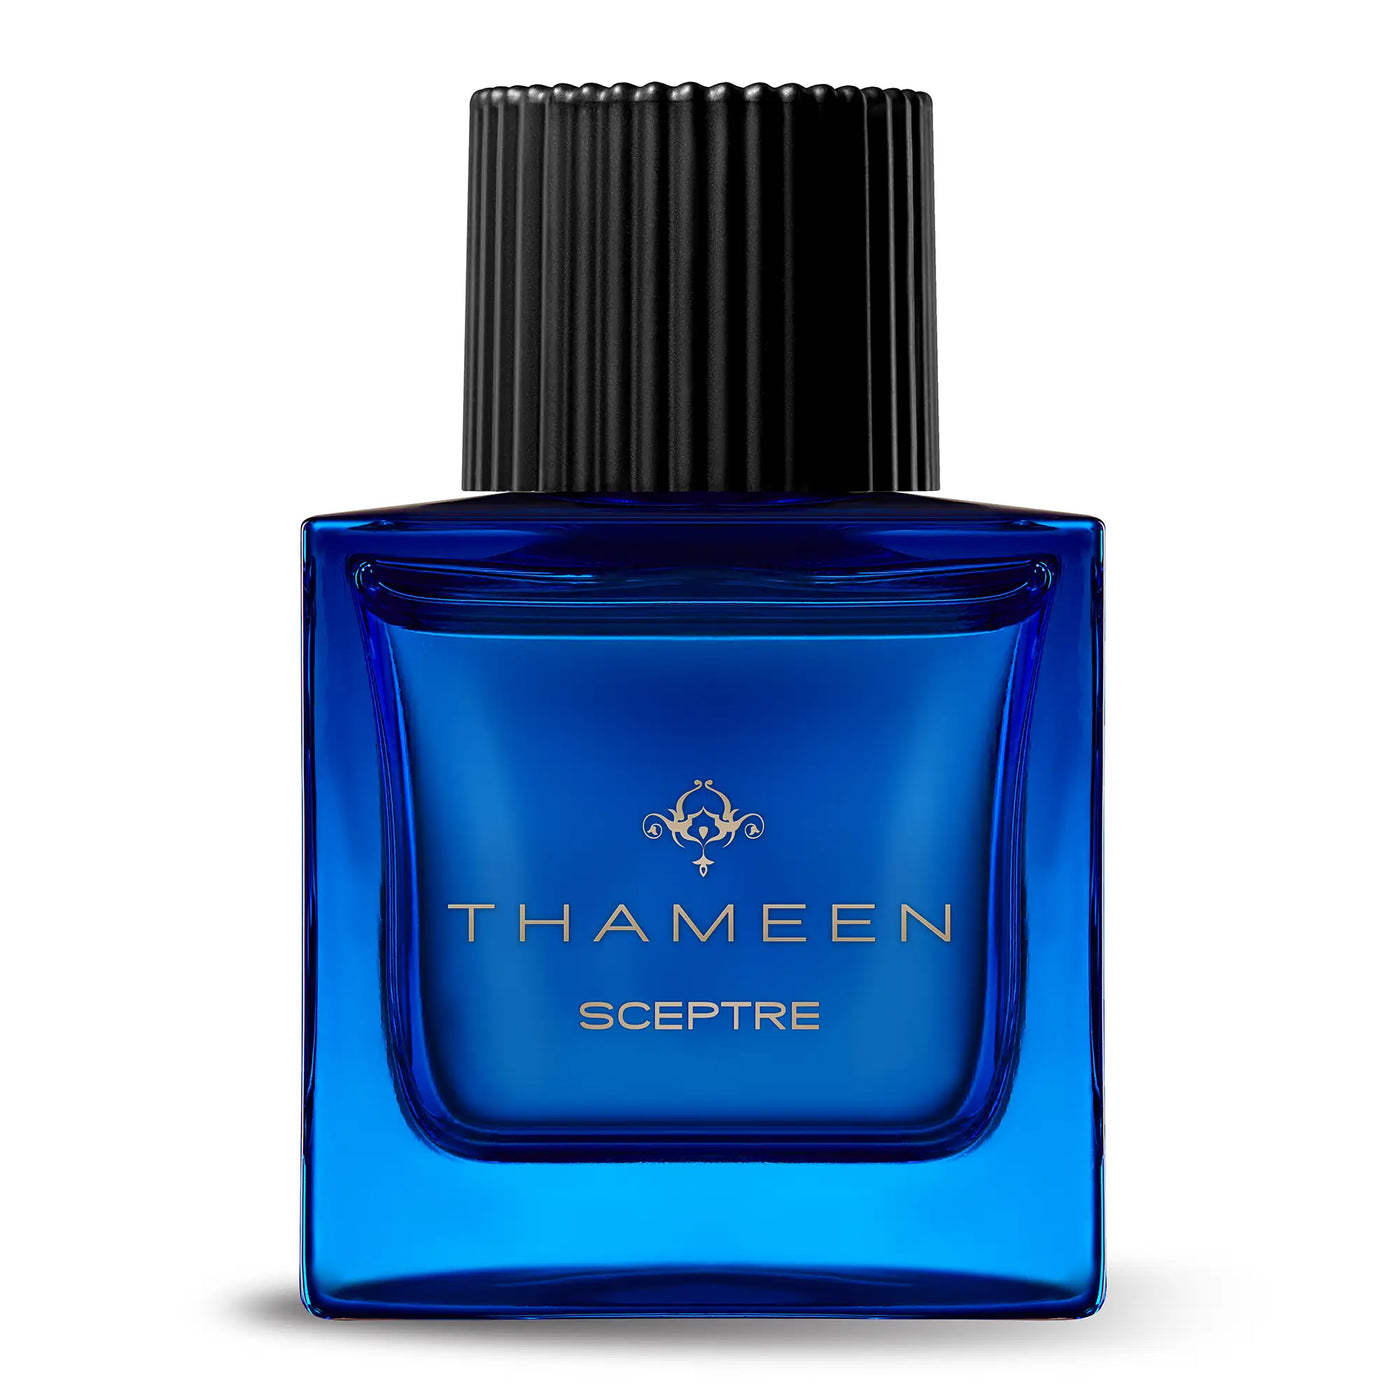 Thameen London Sceptre - 50ml - Gharyal by Collectibles 